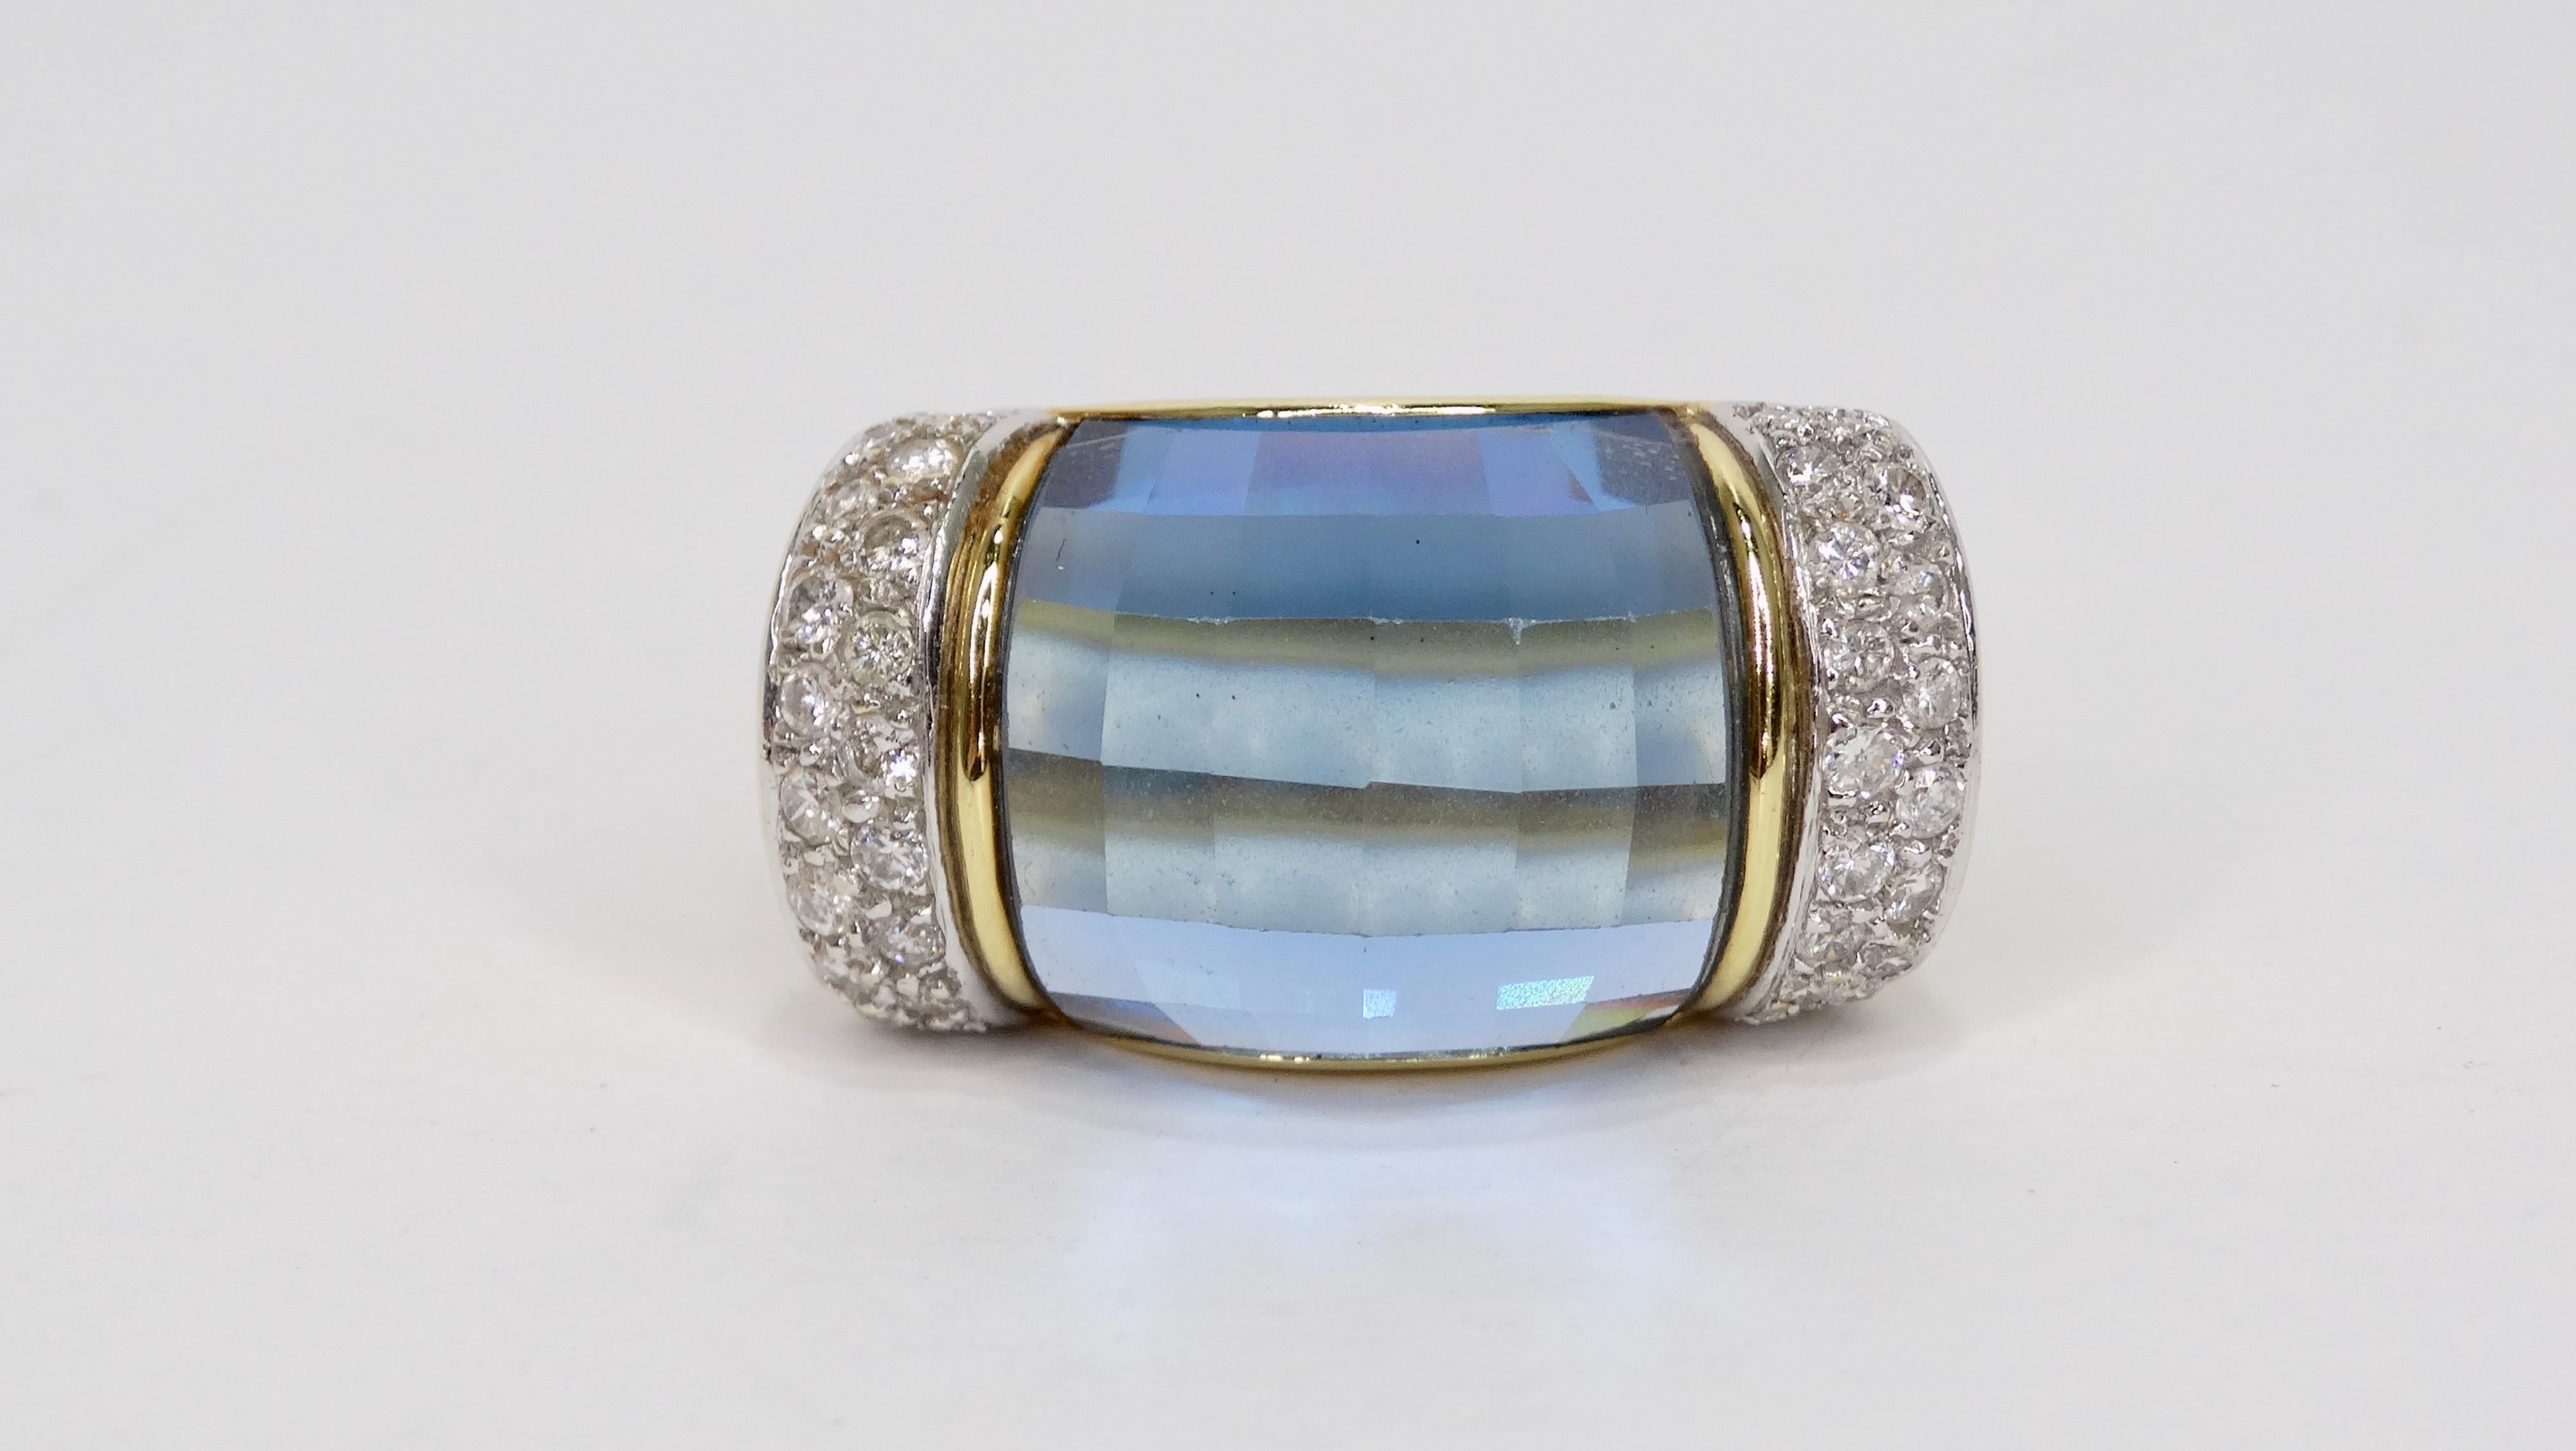 Complete your evening look with this gorgeous ring! Circa mid-20th century, this 18k gold ring features a think band with a beautiful blue topaz gemstone in the center and 4 total rows of brilliant cut diamonds on the side. Stamped 750/18k, is a